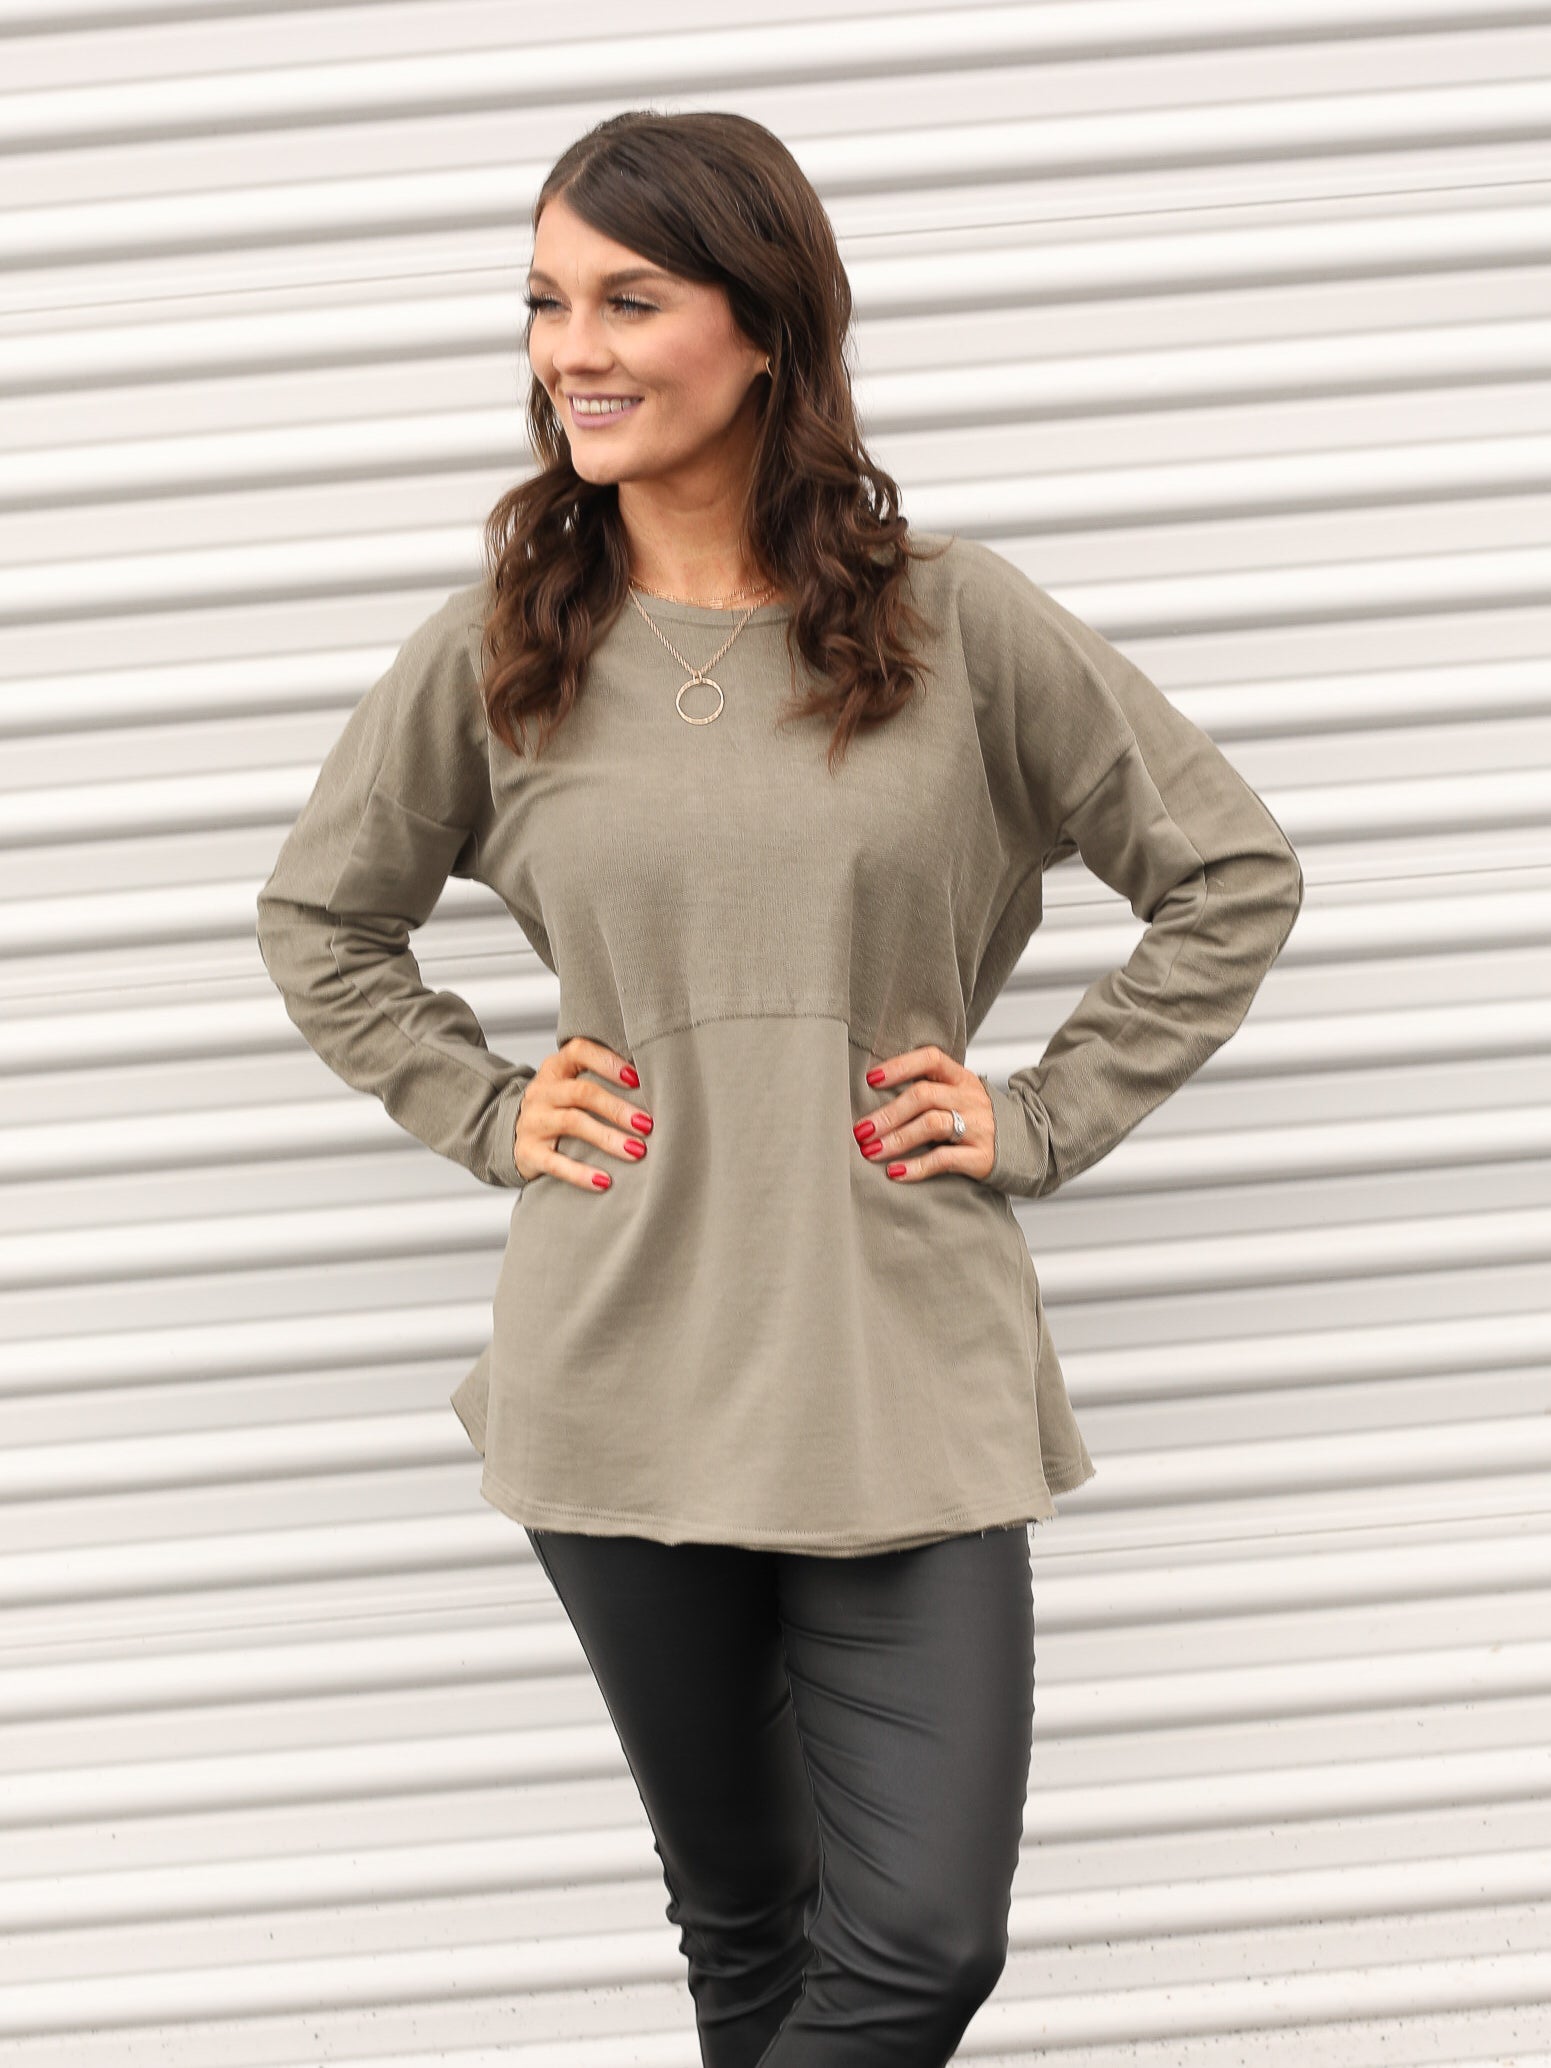 green long sleeve top paired with jeggings and simple necklace